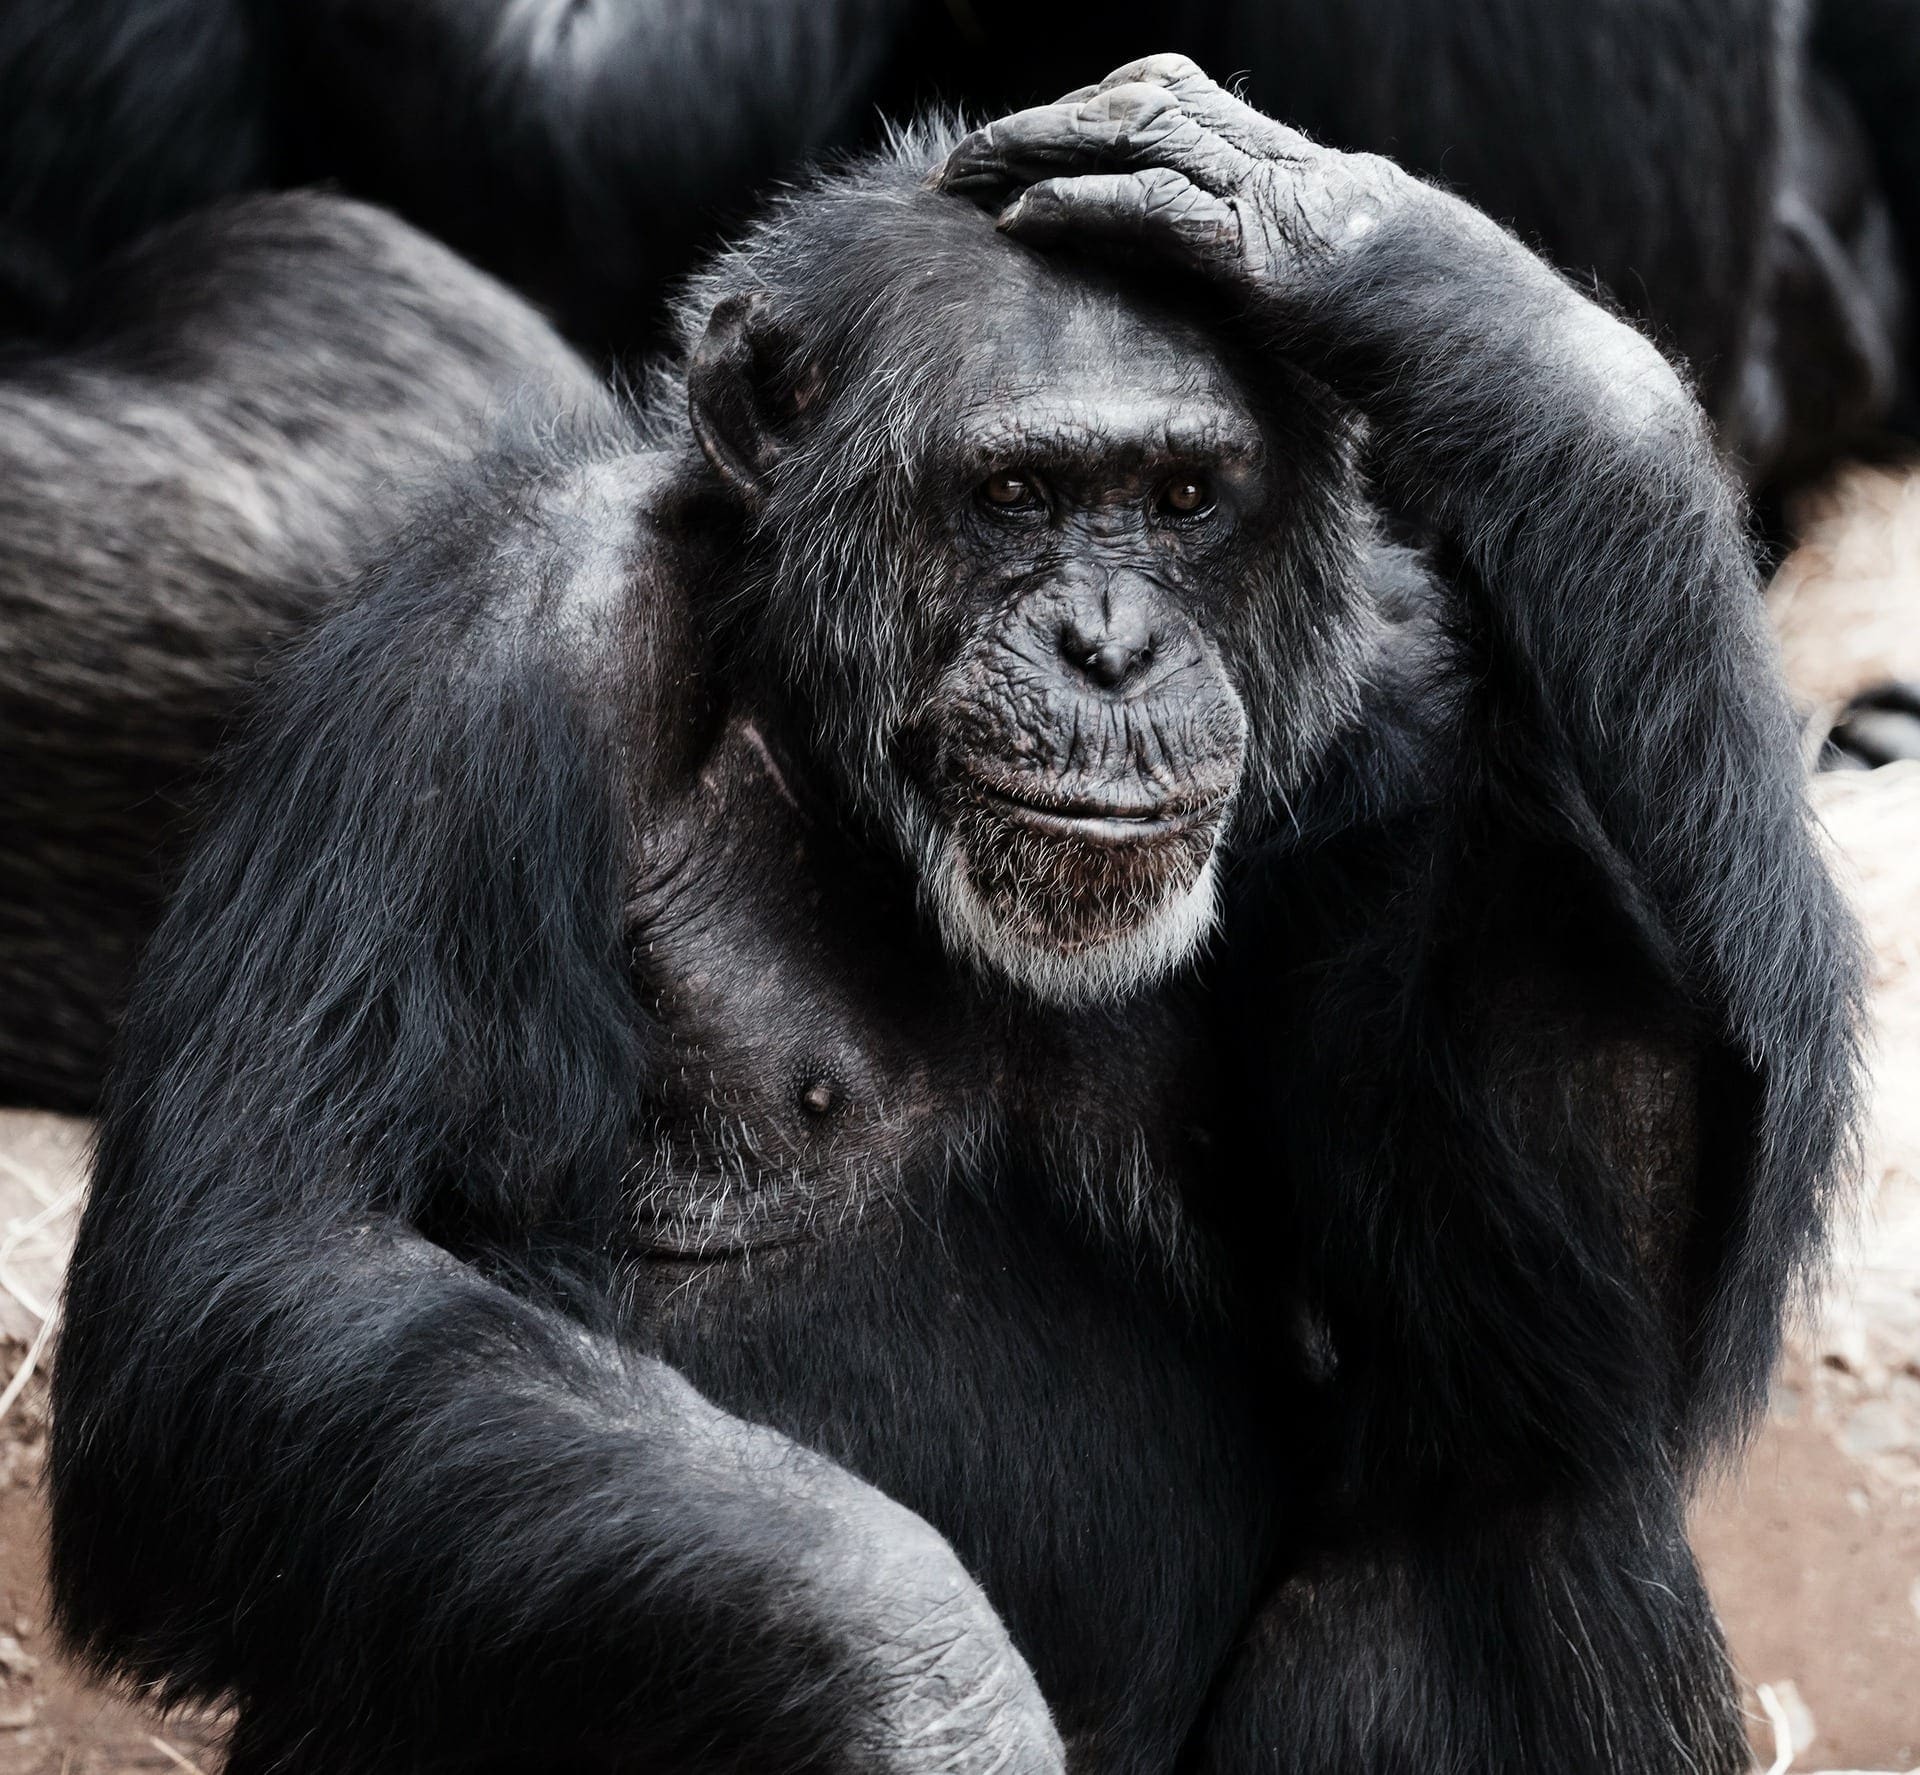 Chimp with a hand on its head